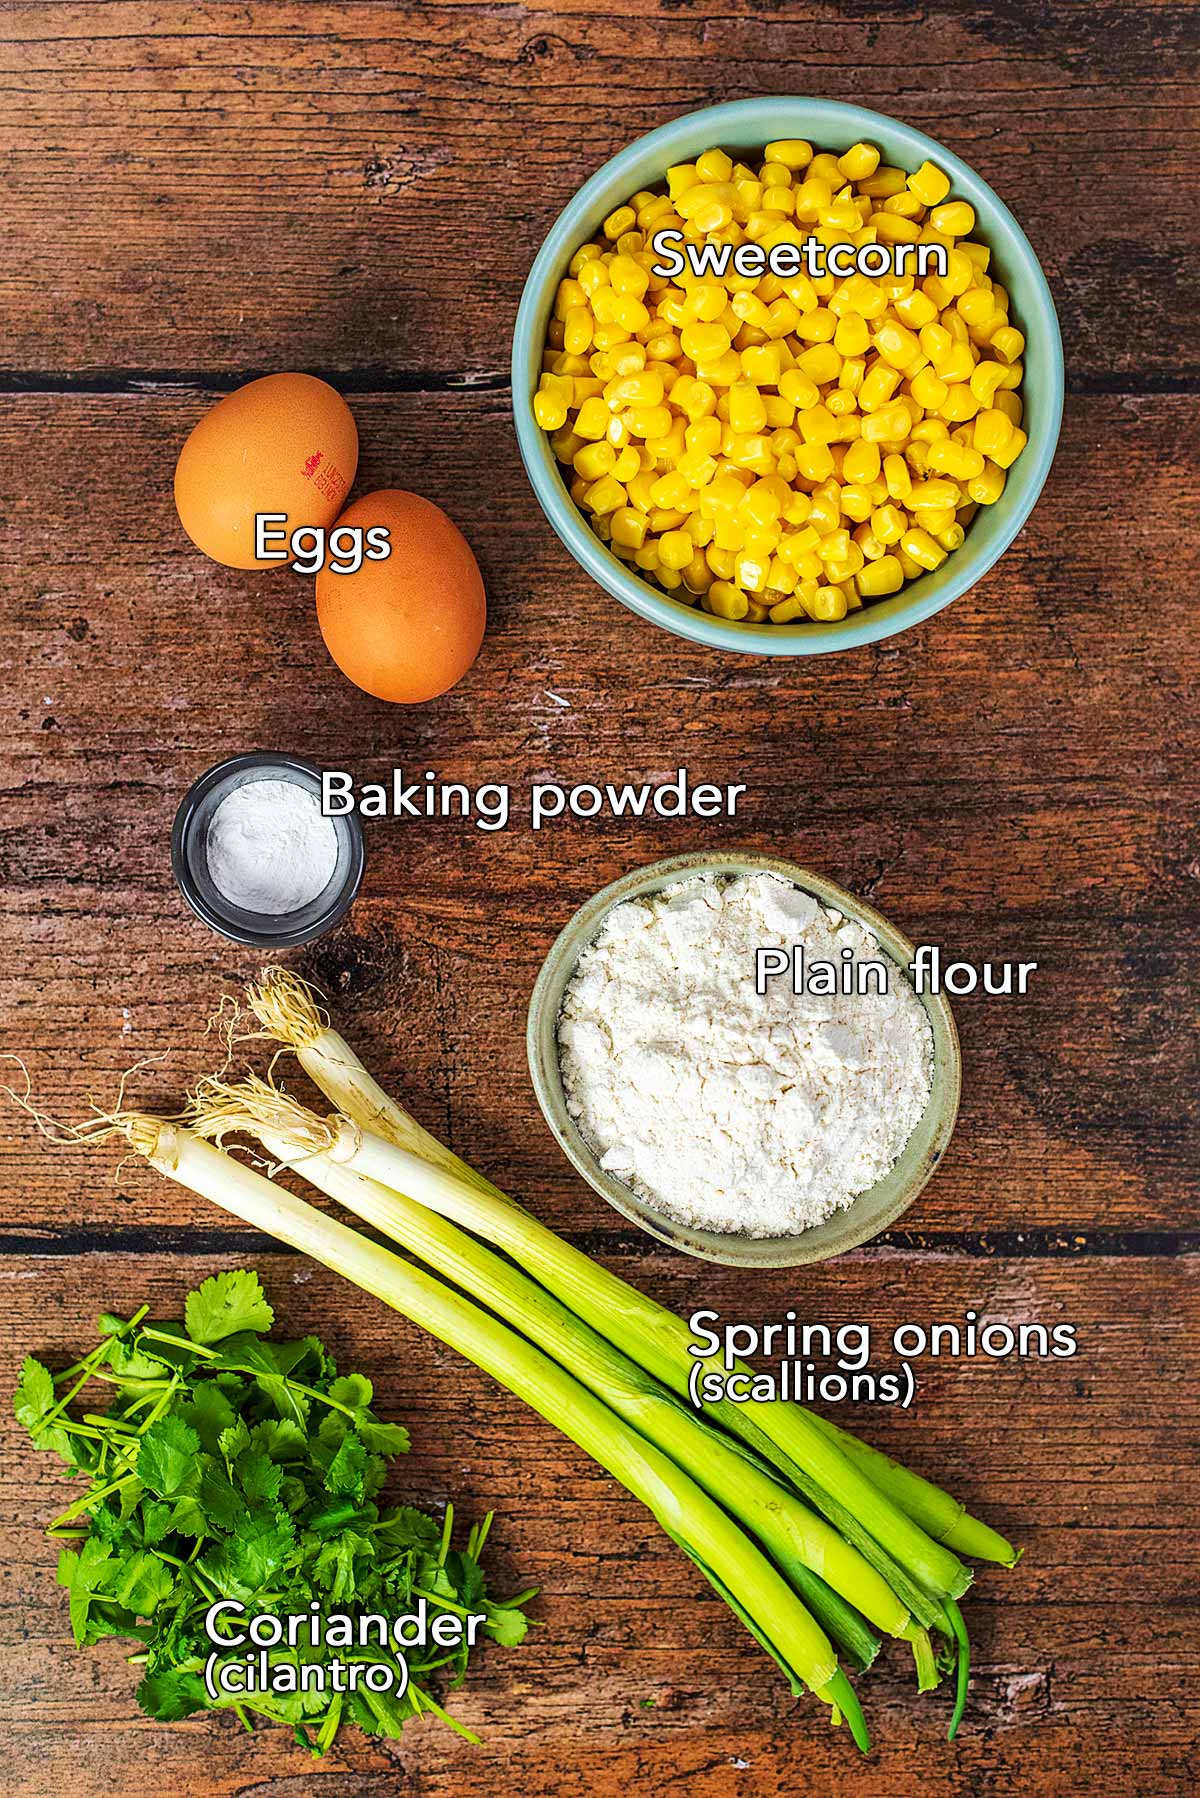 All the ingredients needed to make this recipe laid out on a wooden surface.